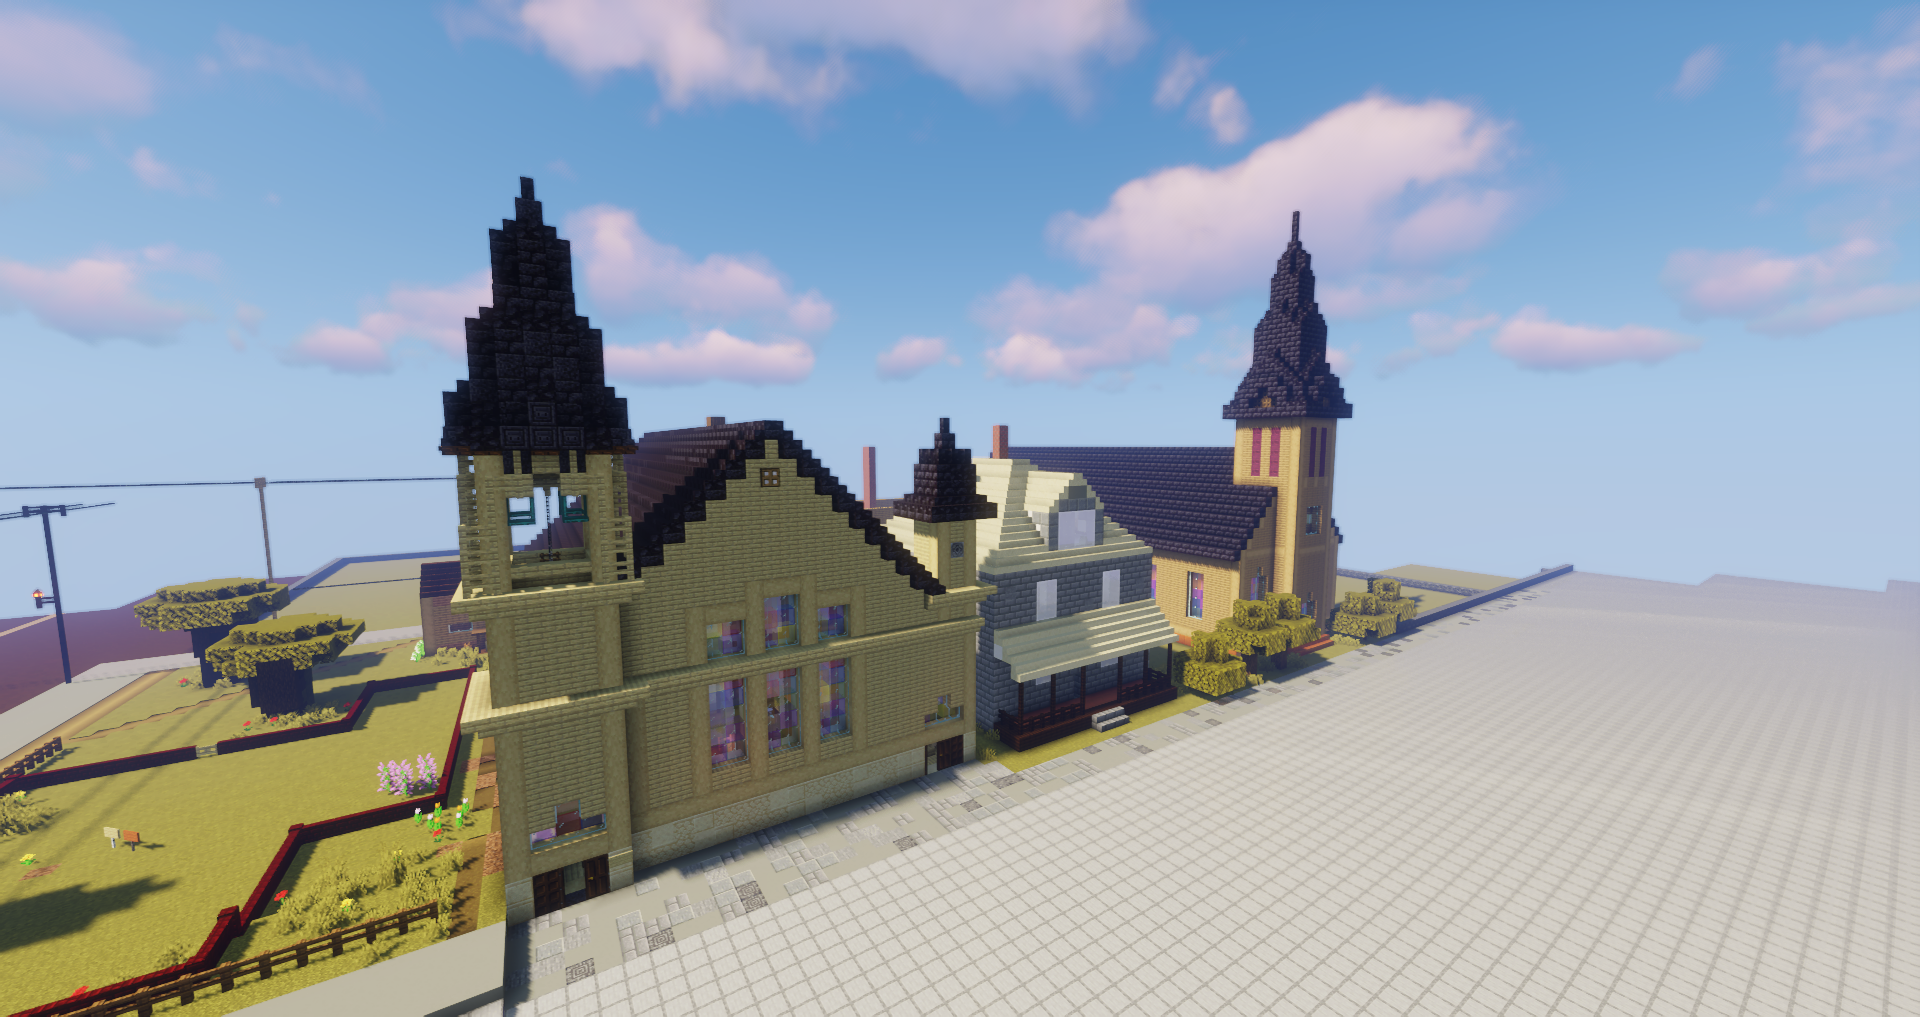 Minecraft recreation of historic churches in downtown Calumet